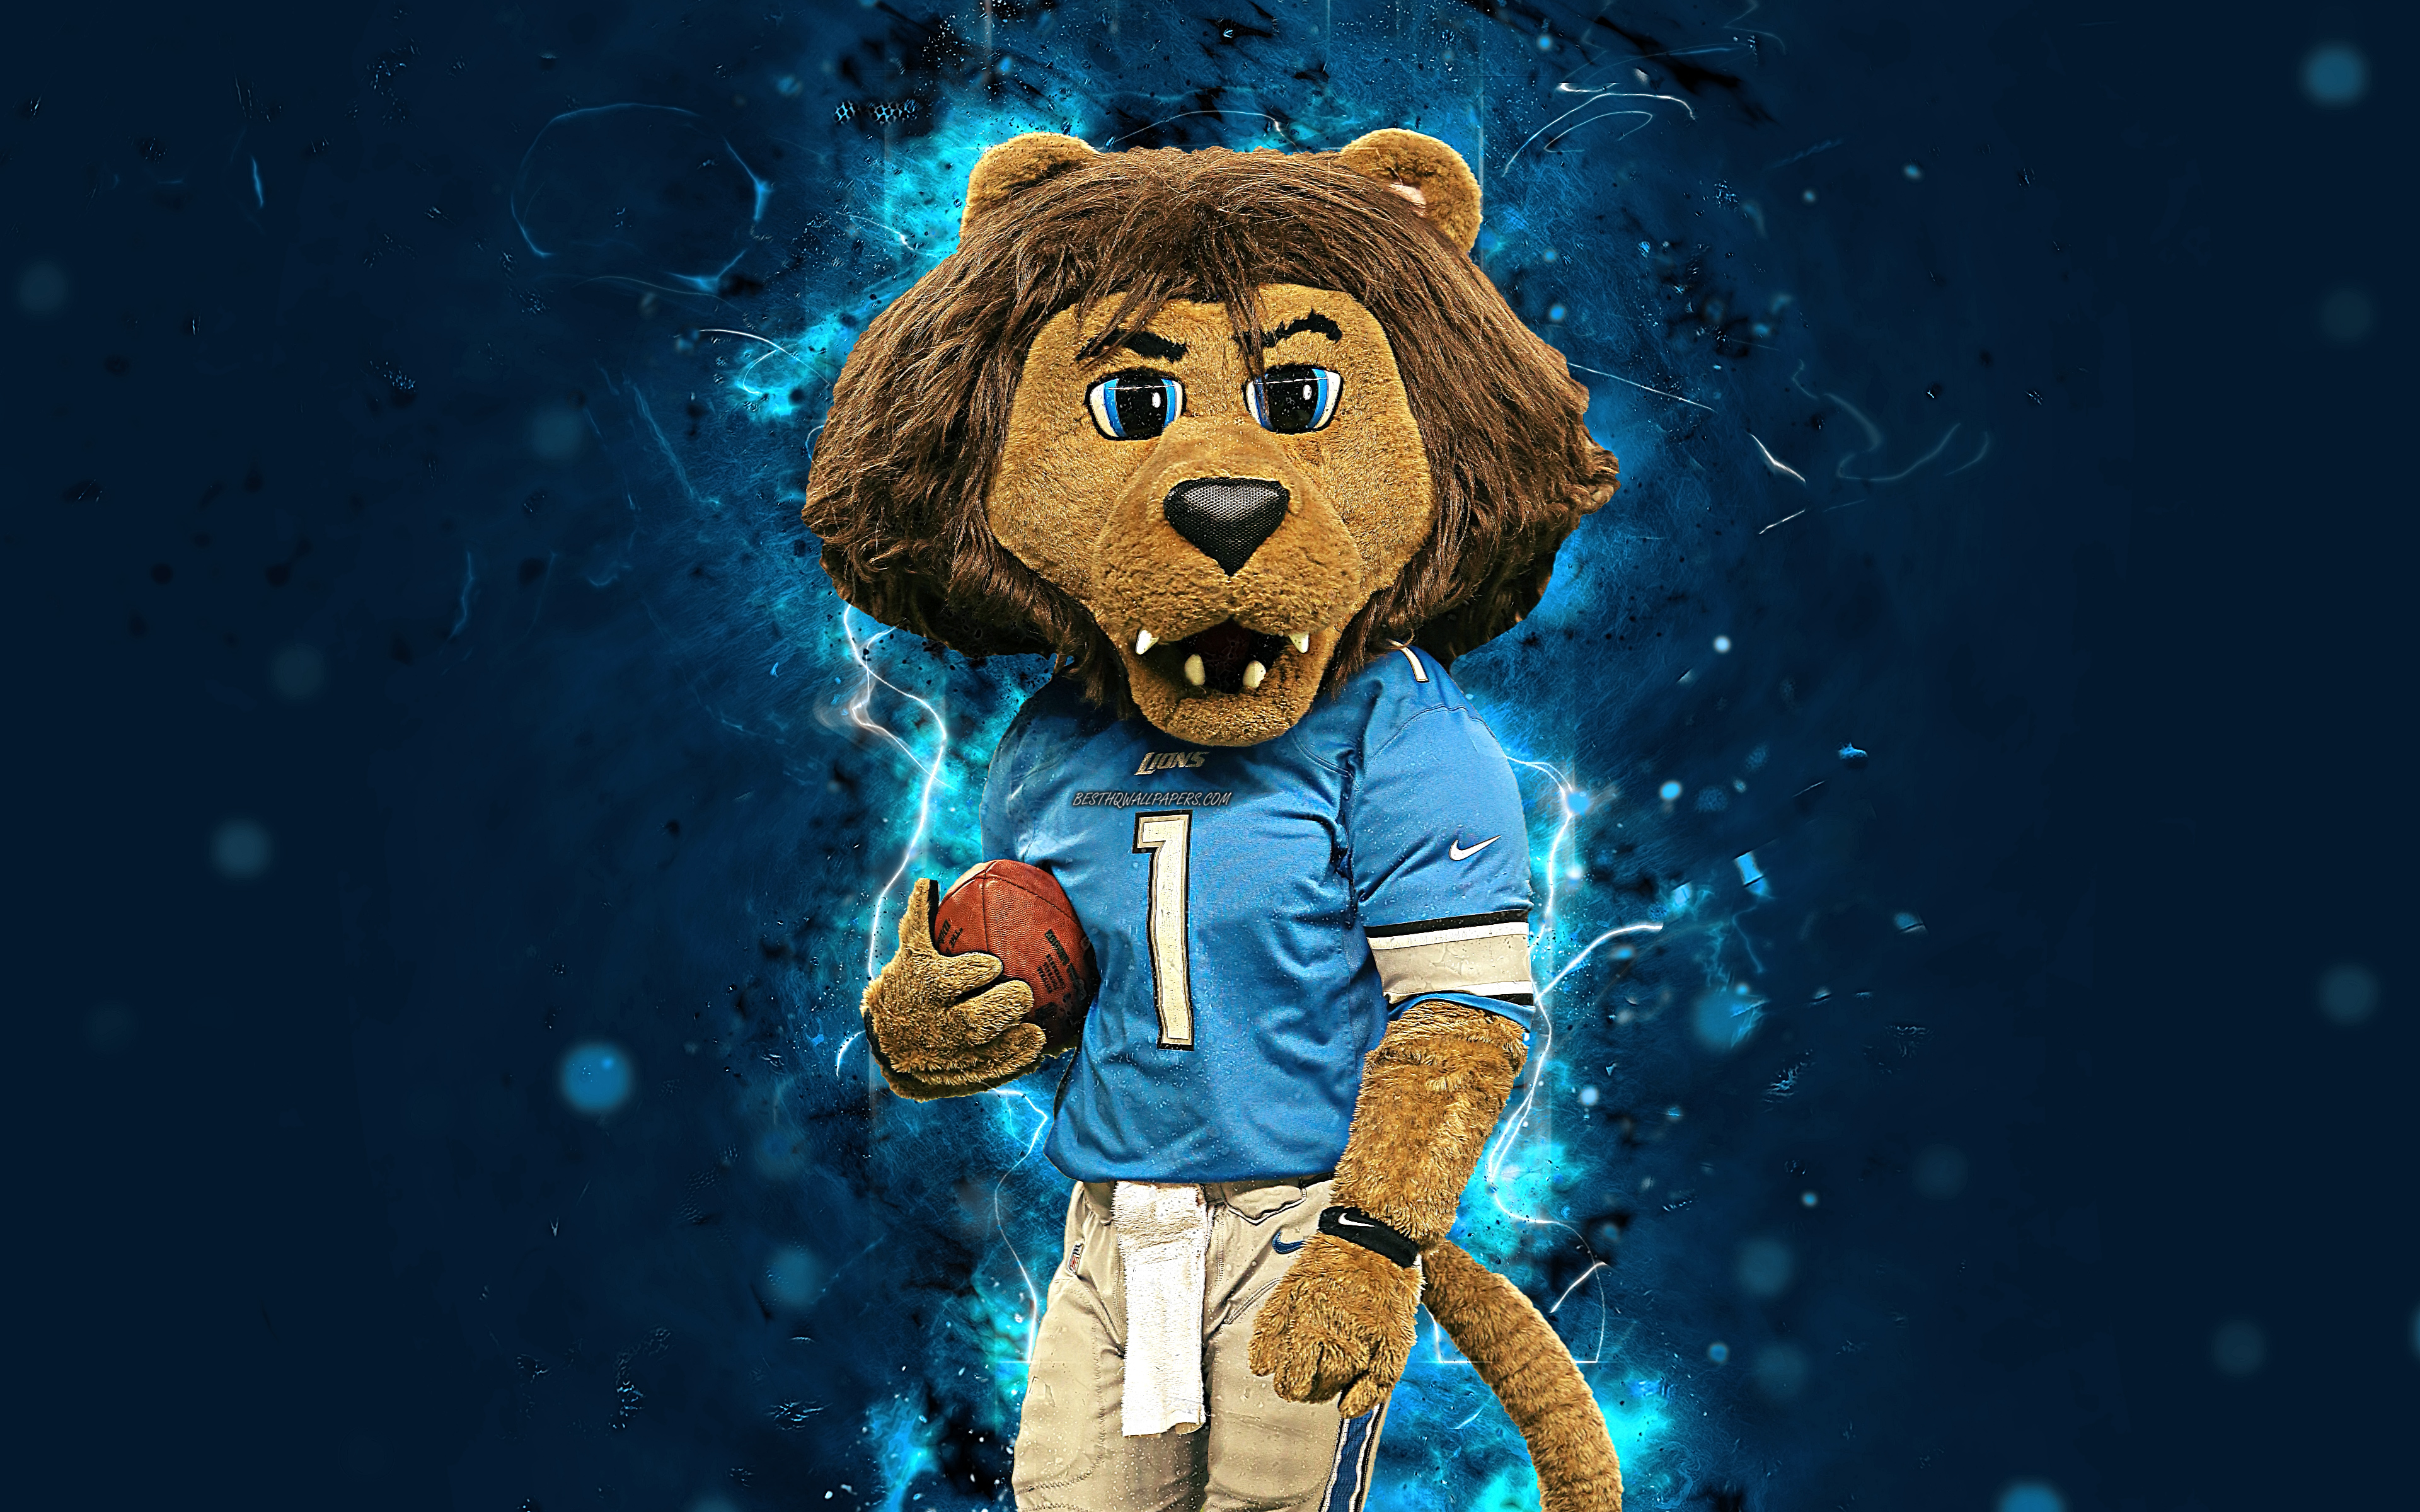 Download wallpaper Roary, 4k, mascot, Detroit Lions, abstract art, NFL, creative, USA, Detroit Lions mascot, National Football League, NFL mascots, official mascot for desktop with resolution 3840x2400. High Quality HD picture wallpaper